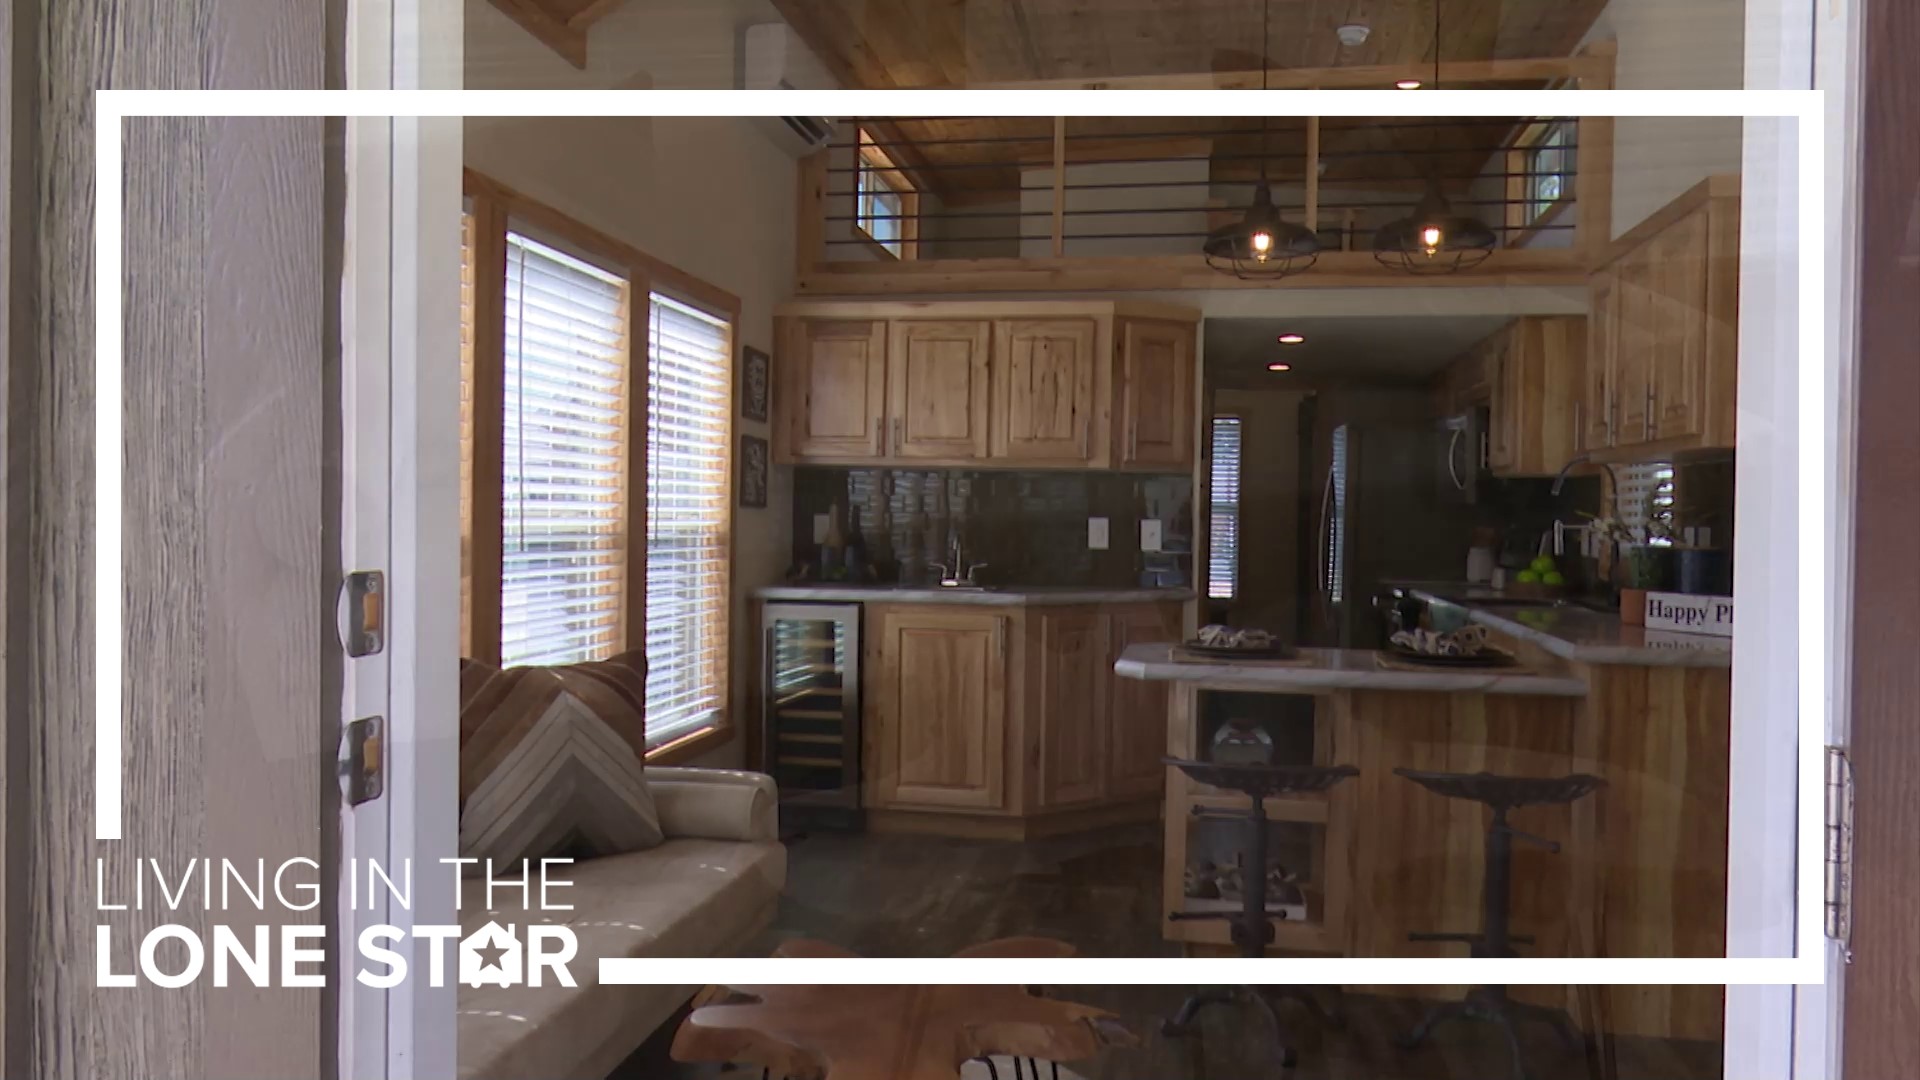 Love entertaining? Co-owner Korey Freels shows us how this tiny home is built for company.